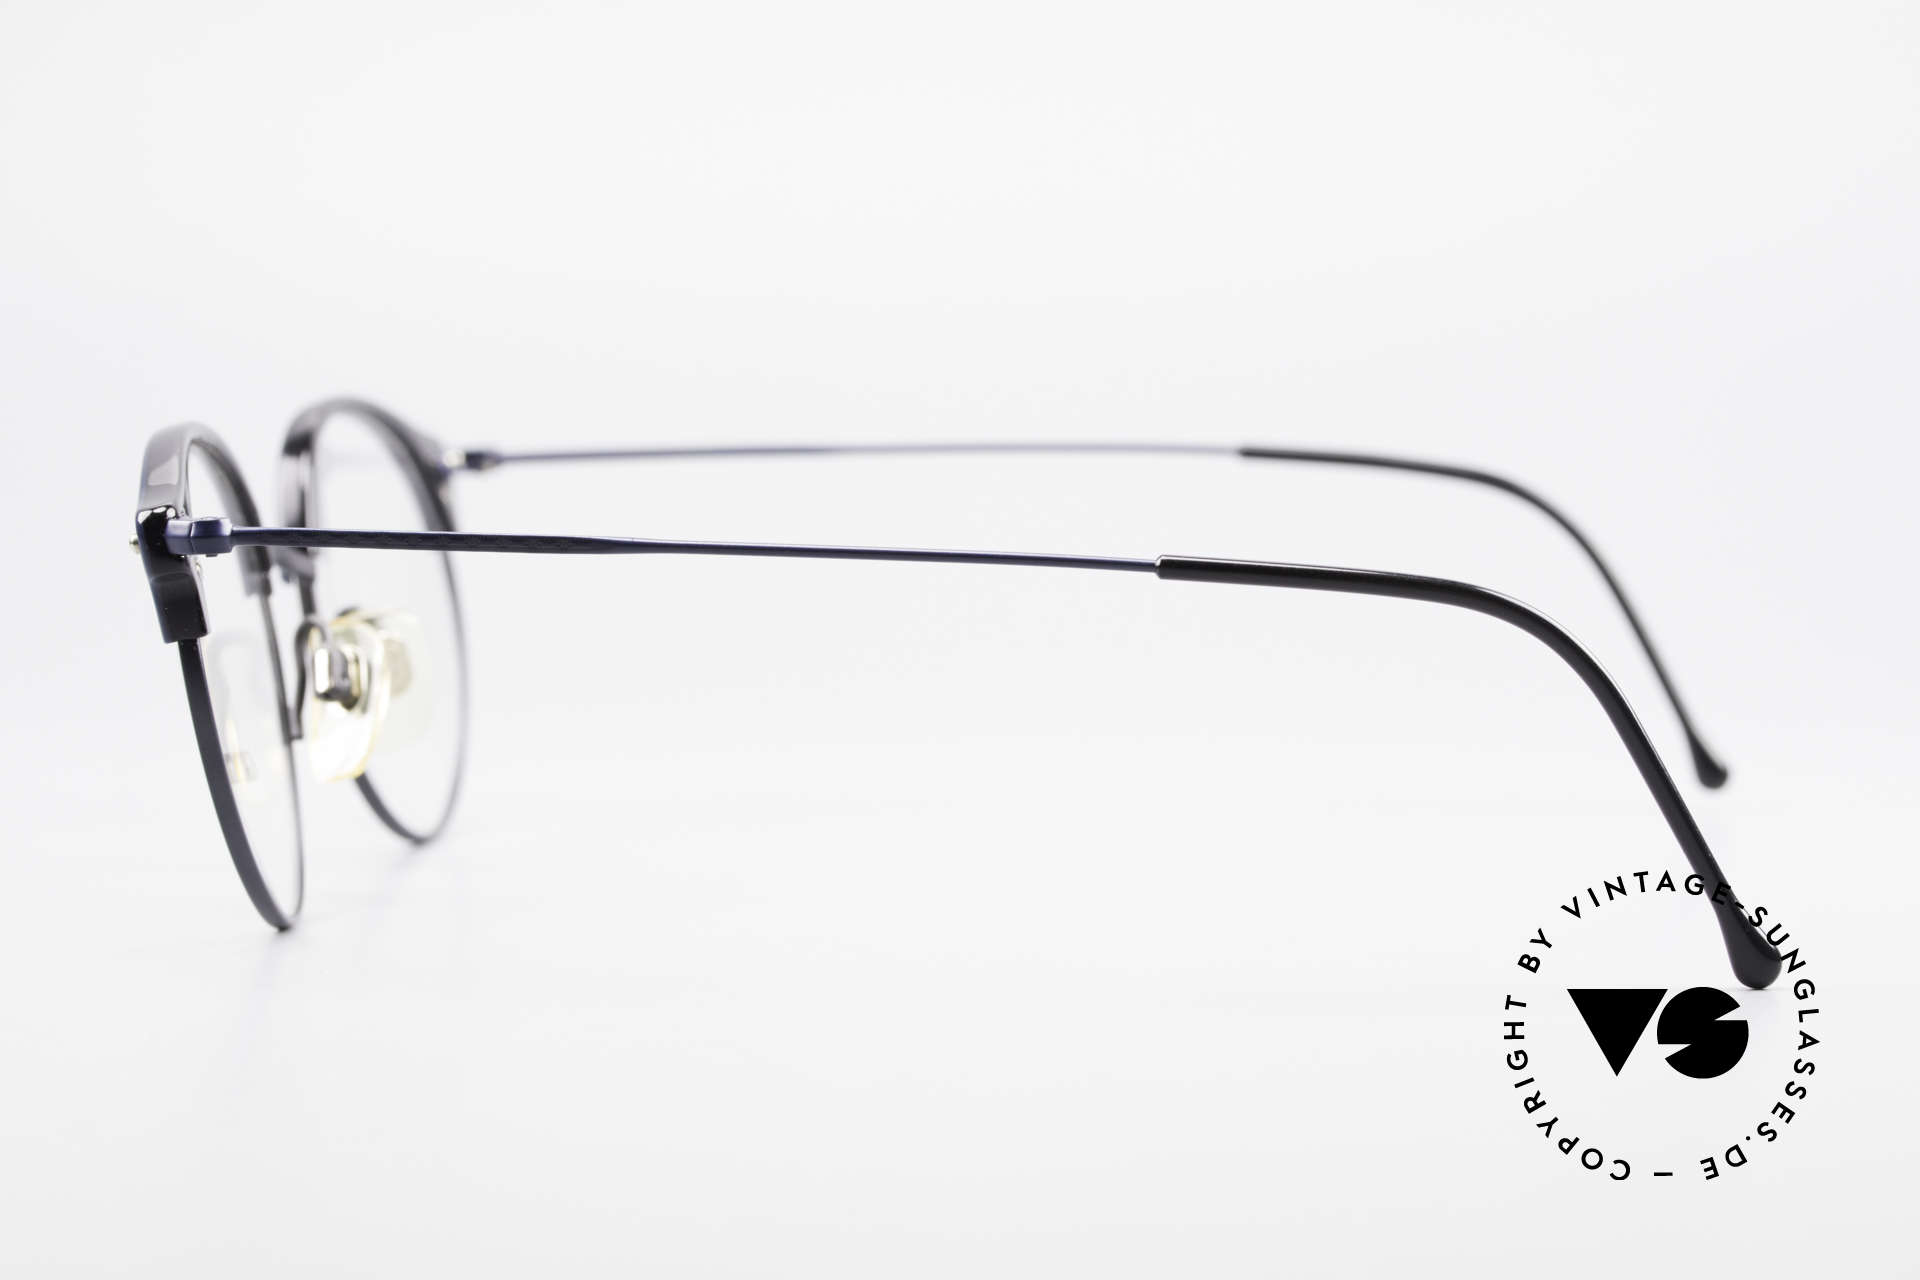 Giorgio Armani 377 90's Panto Style Eyeglasses, DEMO lenses can be replaced with any kind of lenses, Made for Men and Women